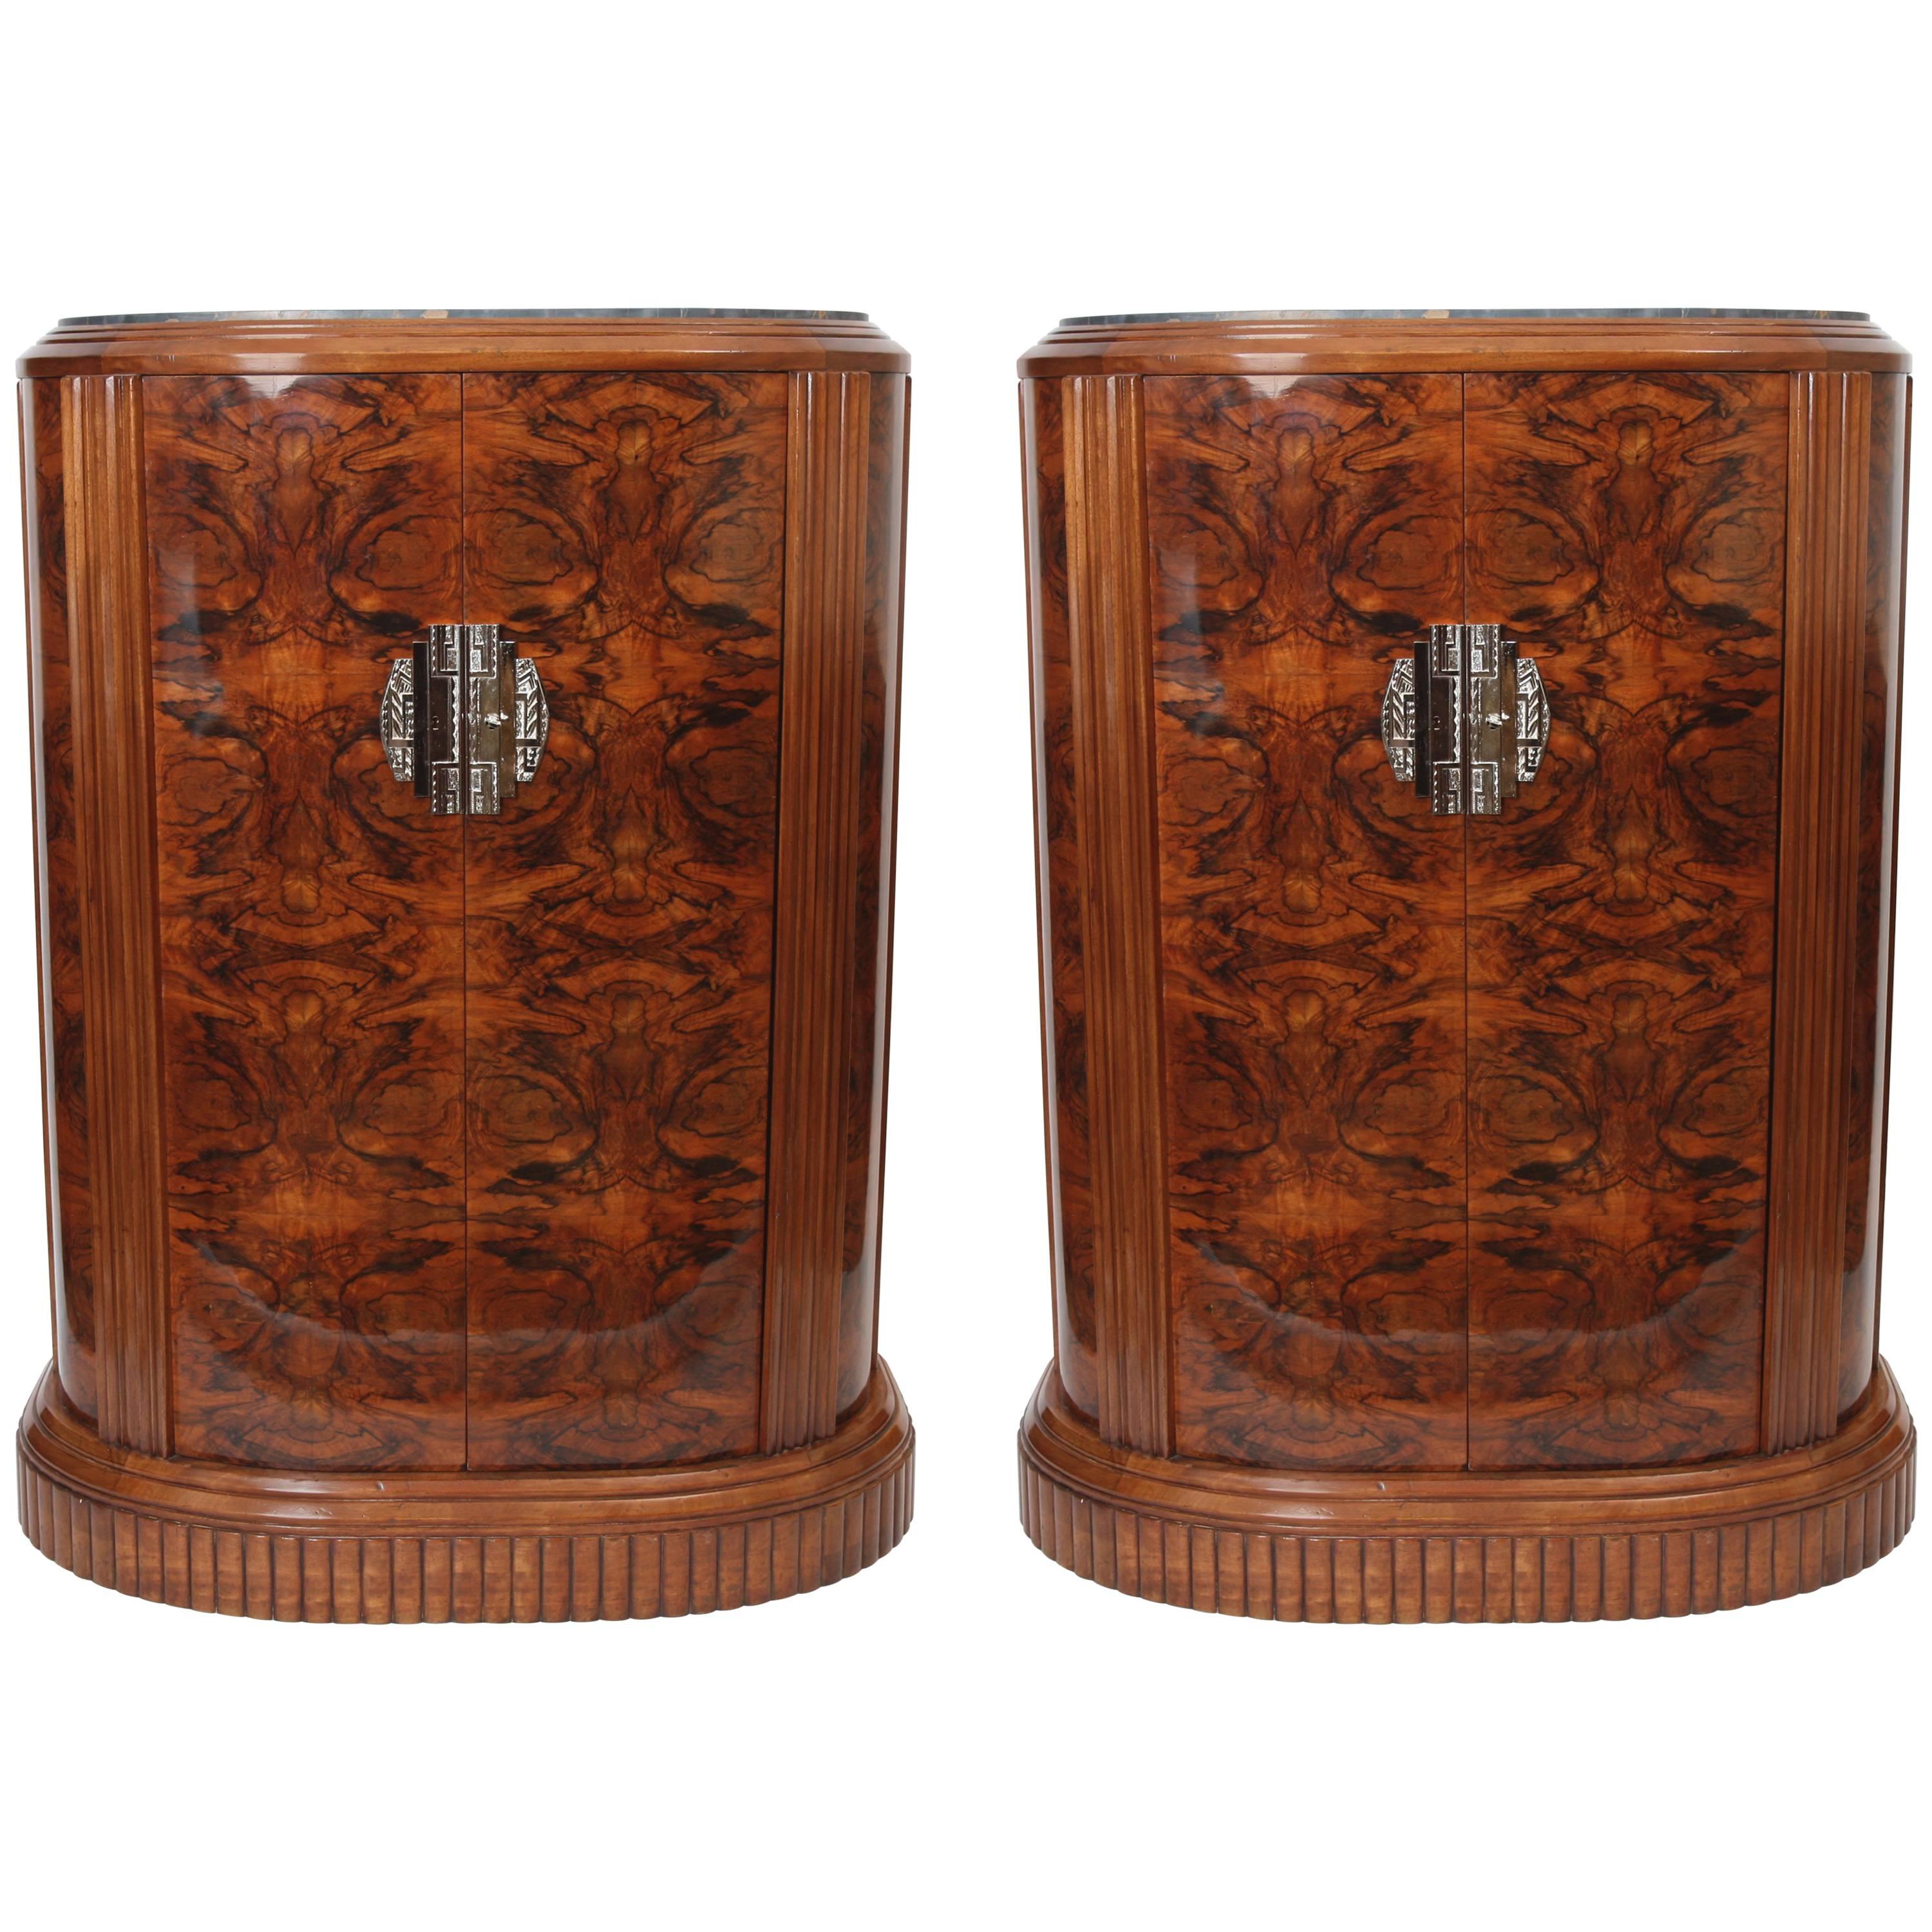 Exceptional and Important Pair of Art Deco Entrance Furniture